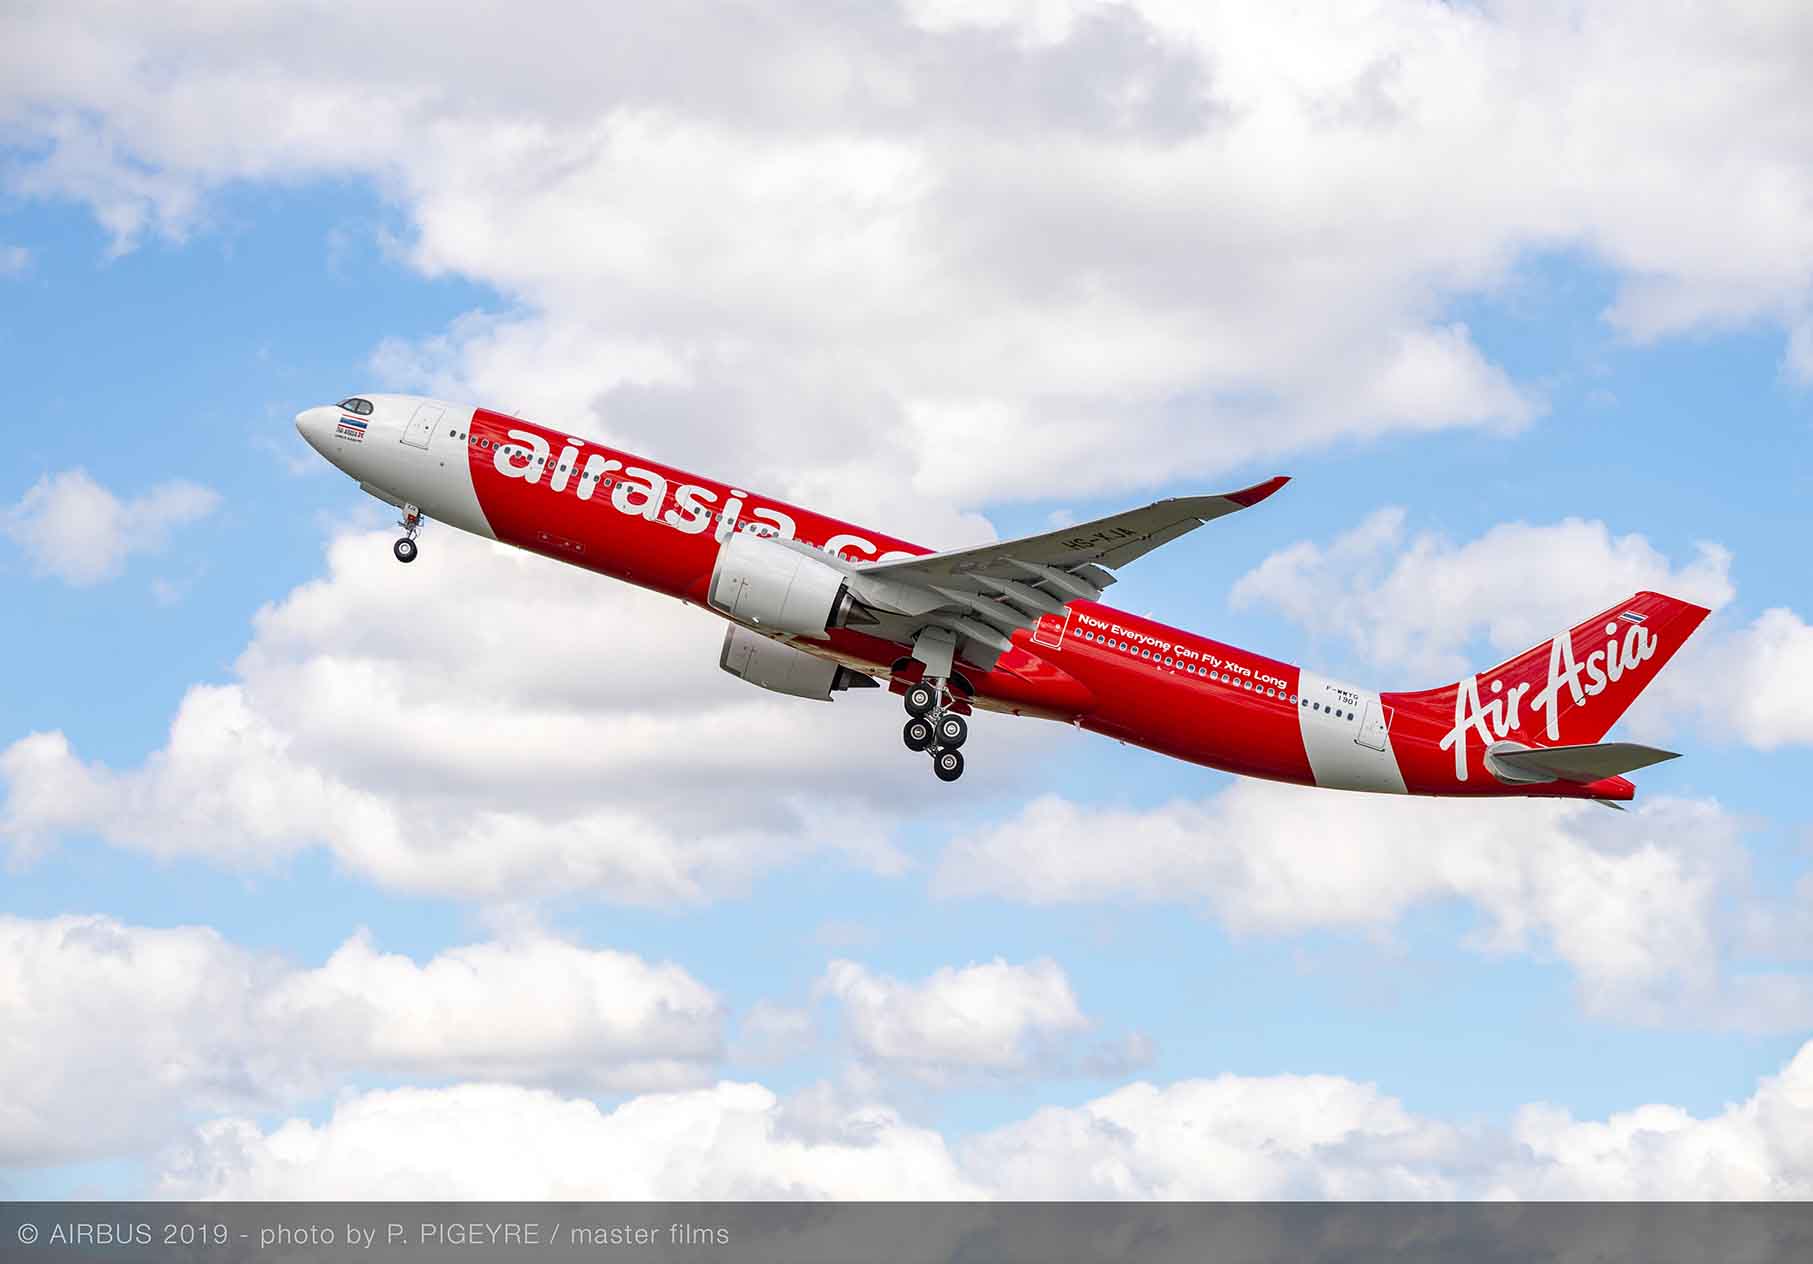 AirAsia X reports strong 2022 with net profit of RM153.5 million